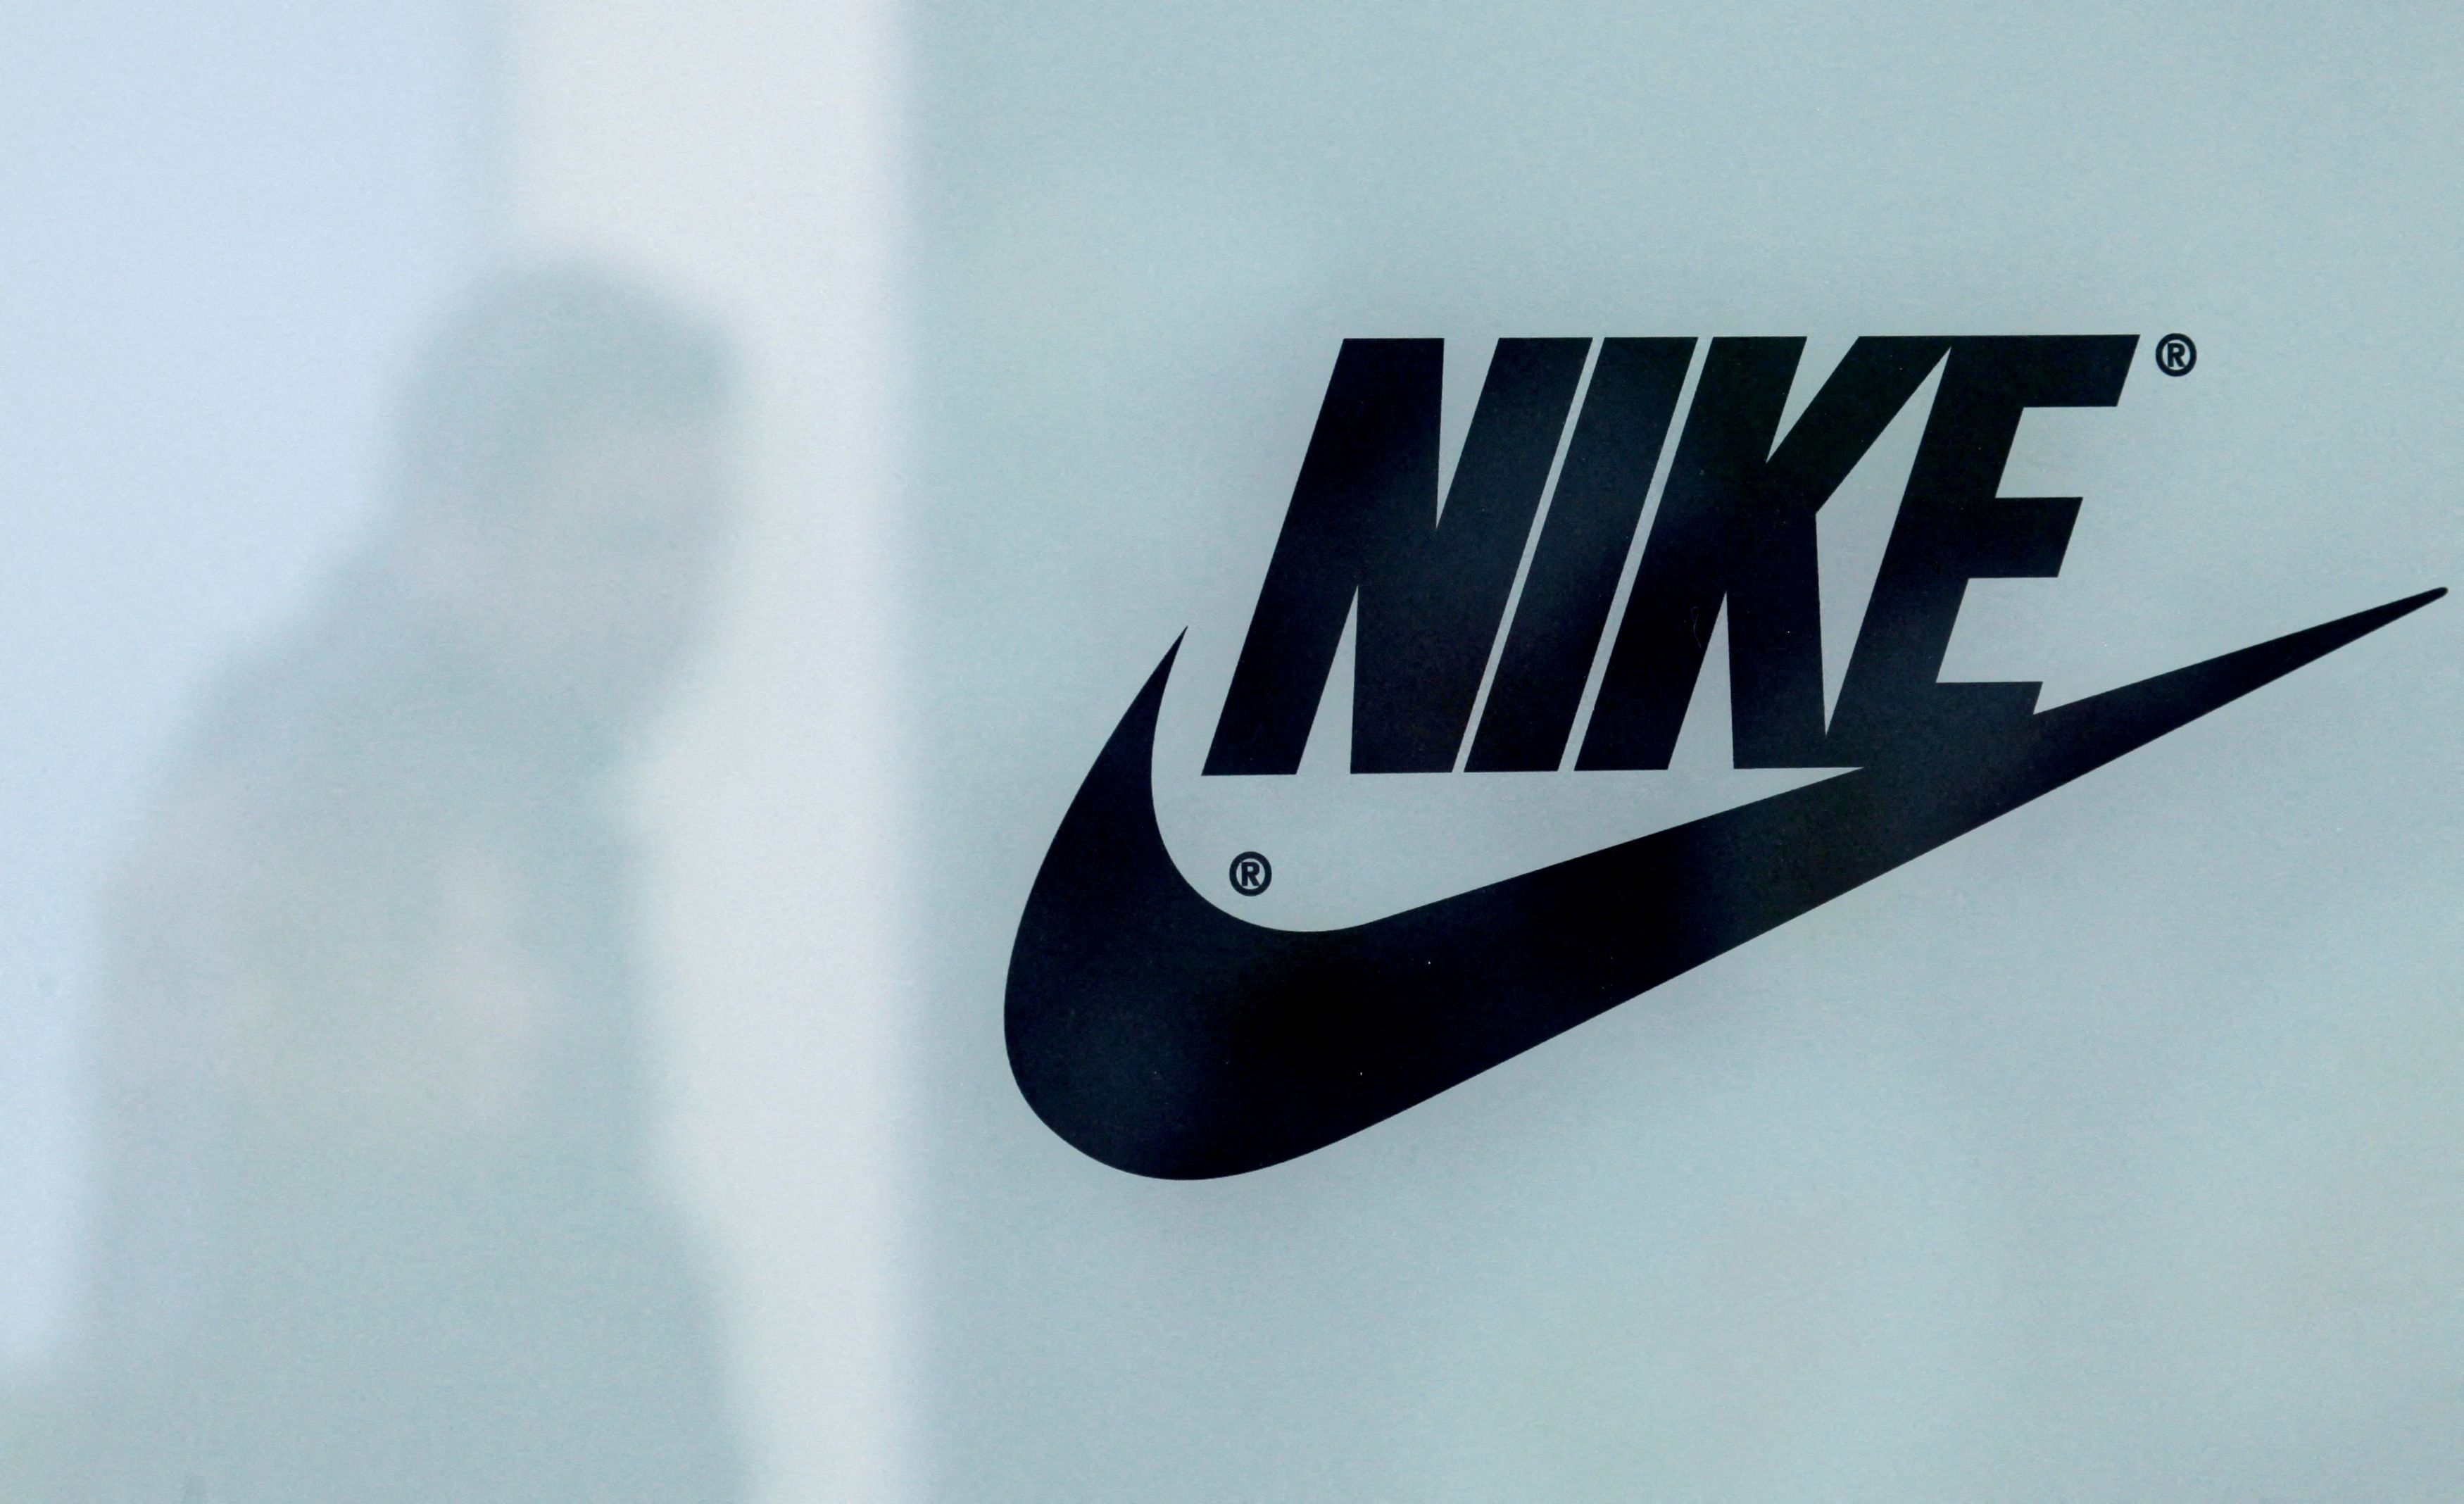 Superior verano Seleccione Some independent Nike stores remain open in Russia over a week after  closure announcement | Reuters